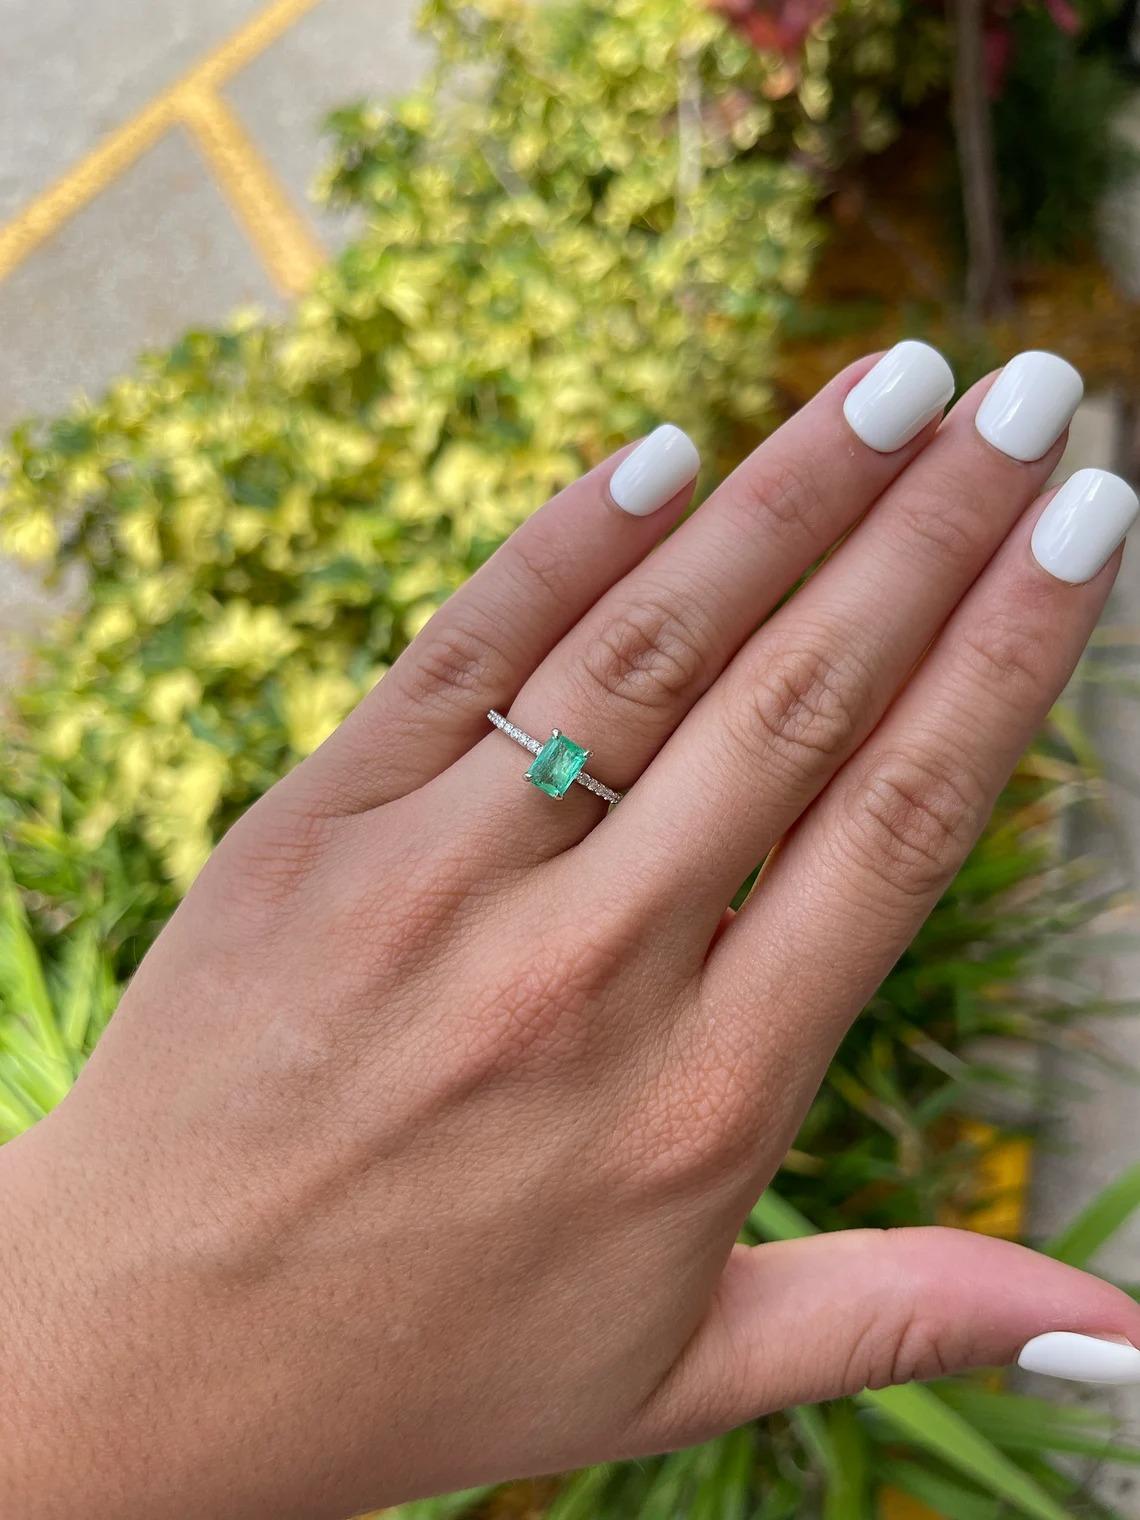 A stunning emerald and diamond engagement ring. The center stone features a beautiful 1.10-carat, natural Colombian emerald-emerald cut. The gem displays a ravishing spring green color, with a yellowish-green hue and very good luster. Natural